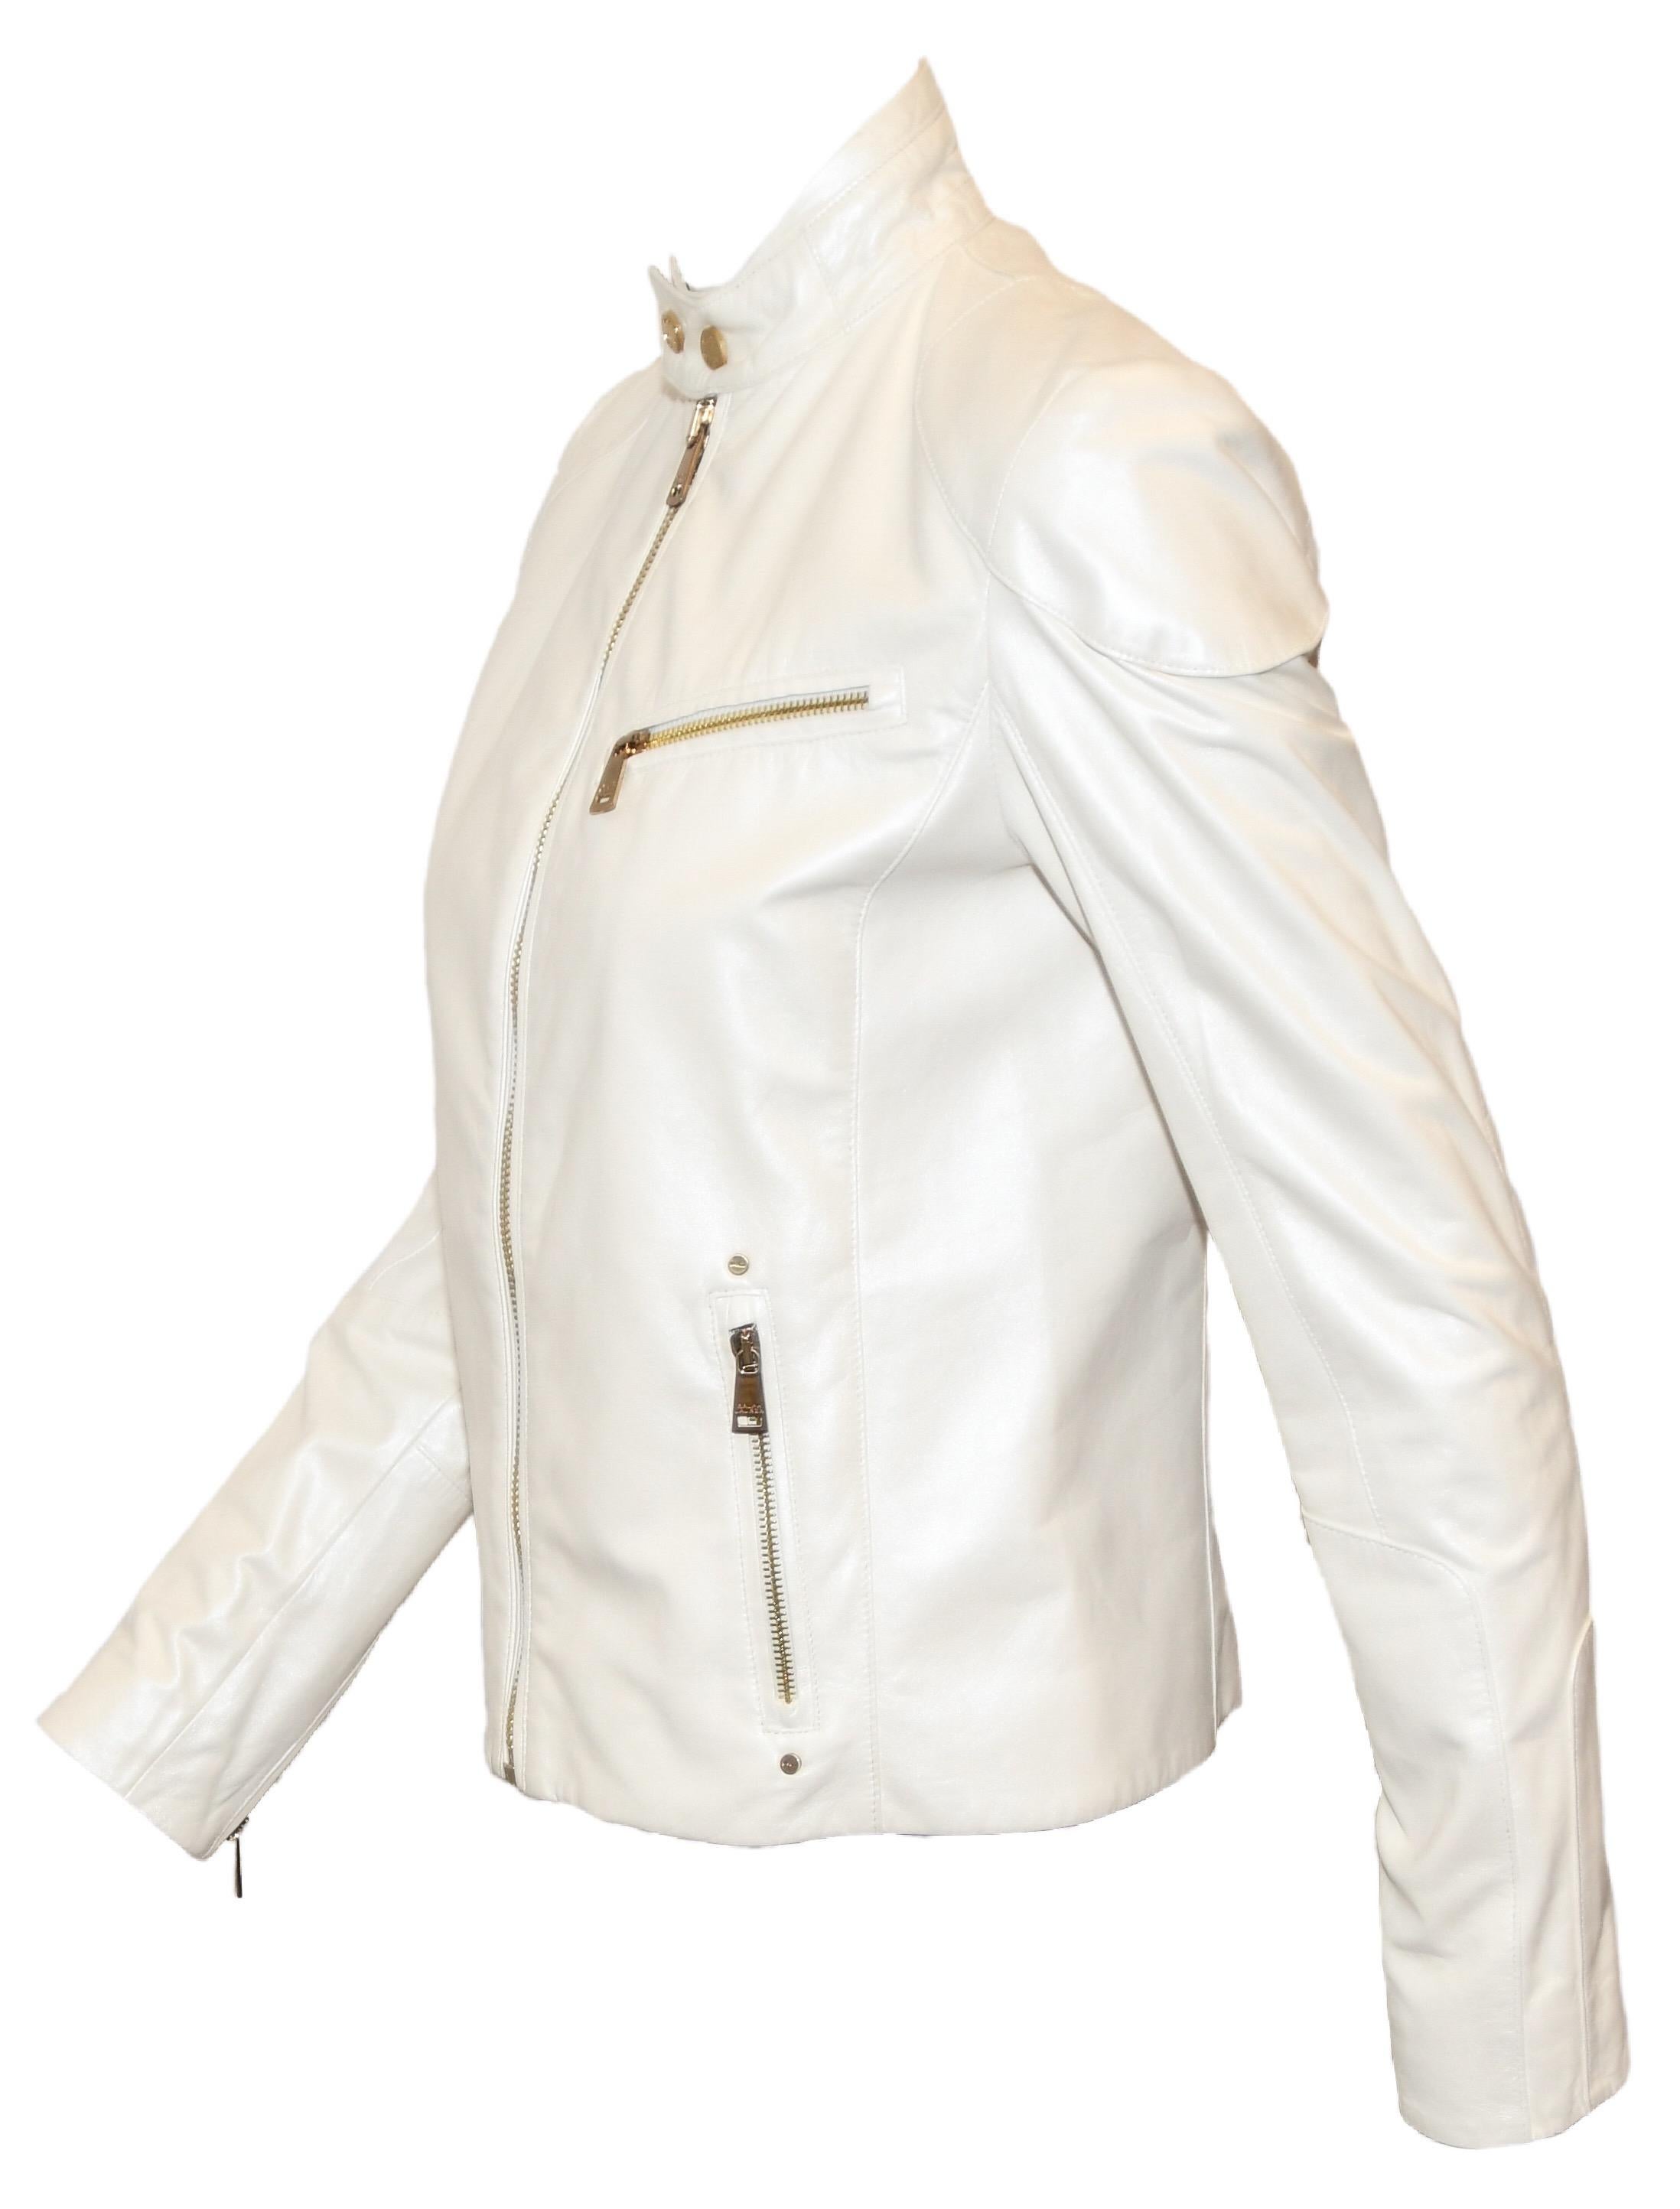 Ralph Lauren ivory iridescent leather biker/ bomber style jacket is detailed with gold tone zippers all over.  With 2 side zippered side pockets, 1 zippered chest pocket, a zipper of each cuff and a zipper at front for closure.  Jackets contains an